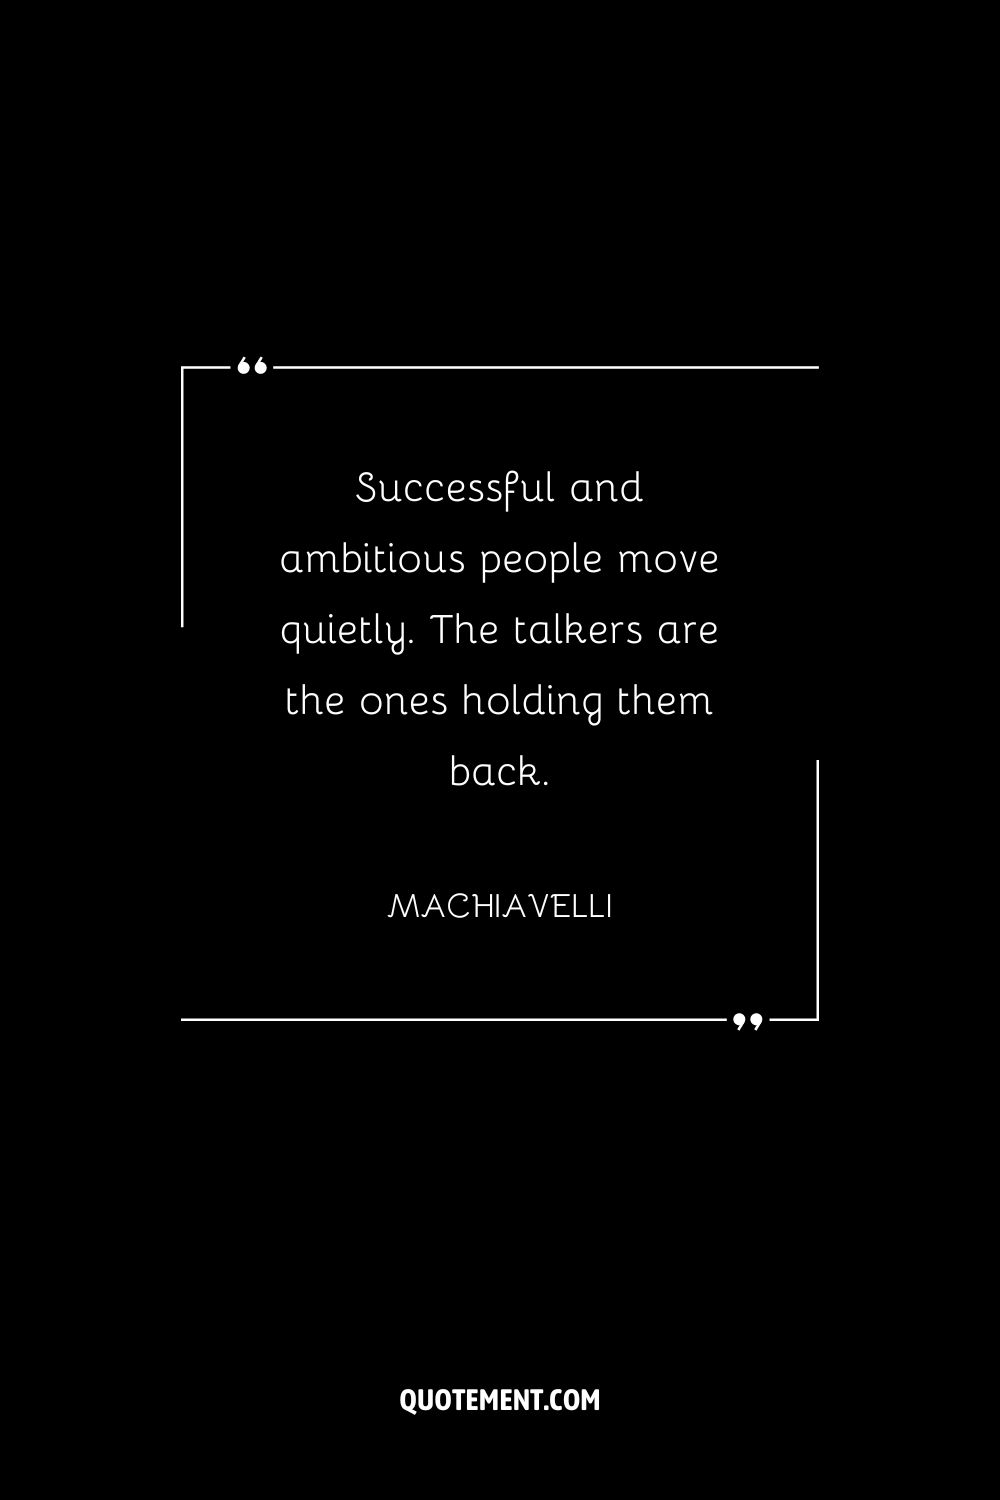 Successful and ambitious people move quietly. The talkers are the ones holding them back